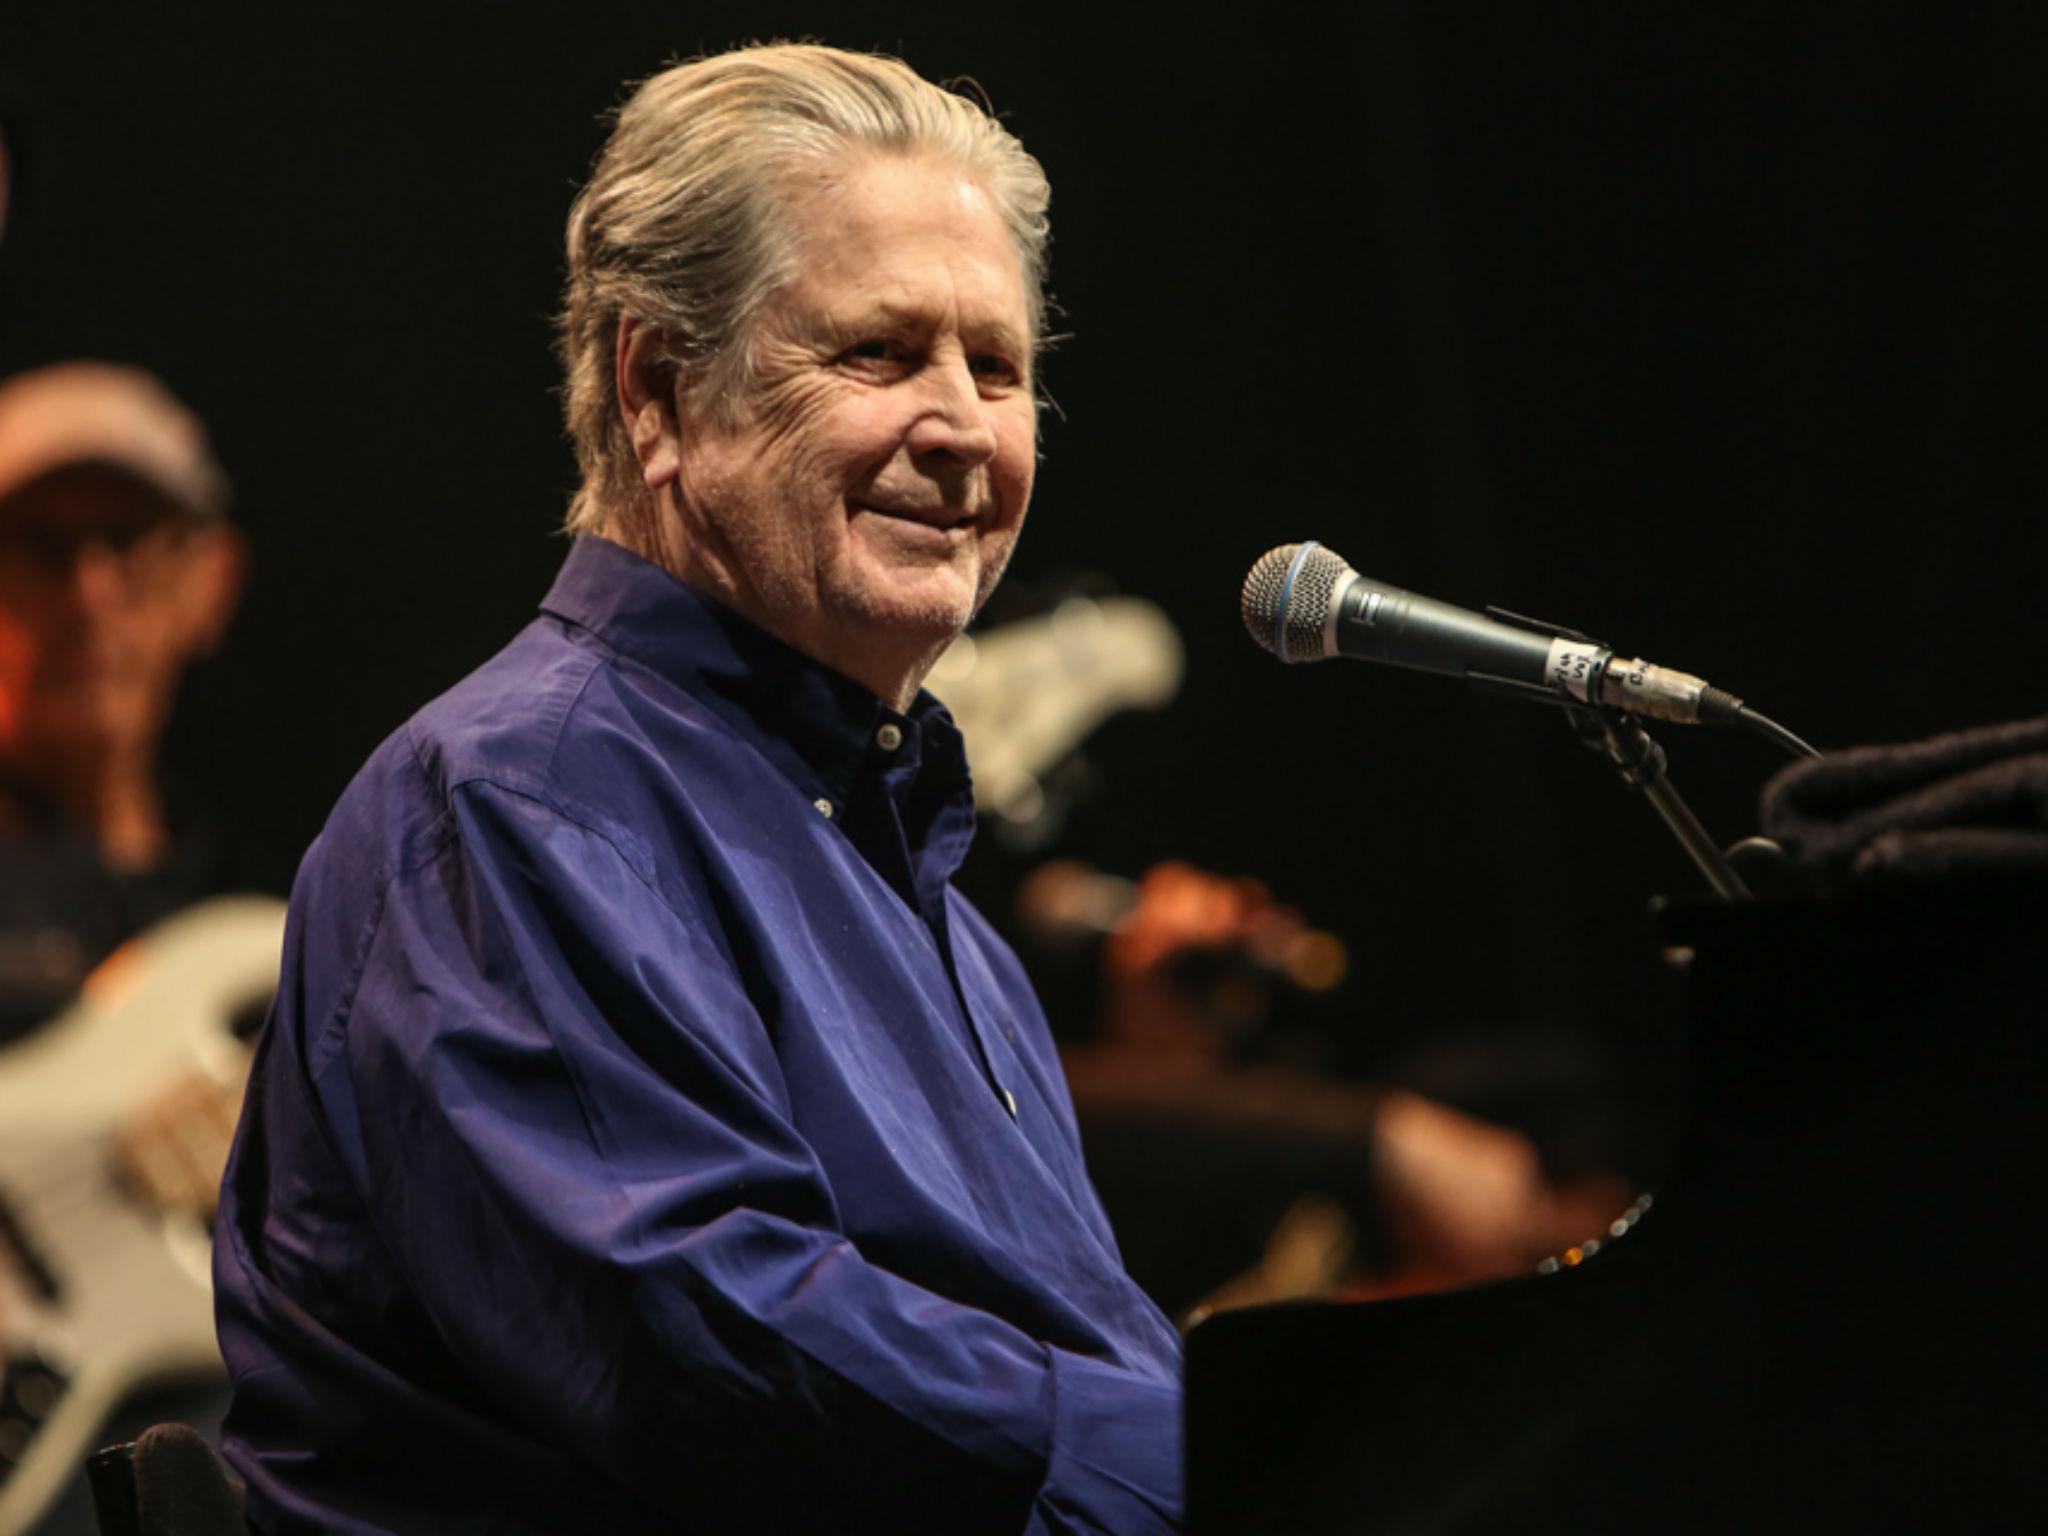 Glimmers of his broken genius: Brian Wilson headlining at Together the People Festival